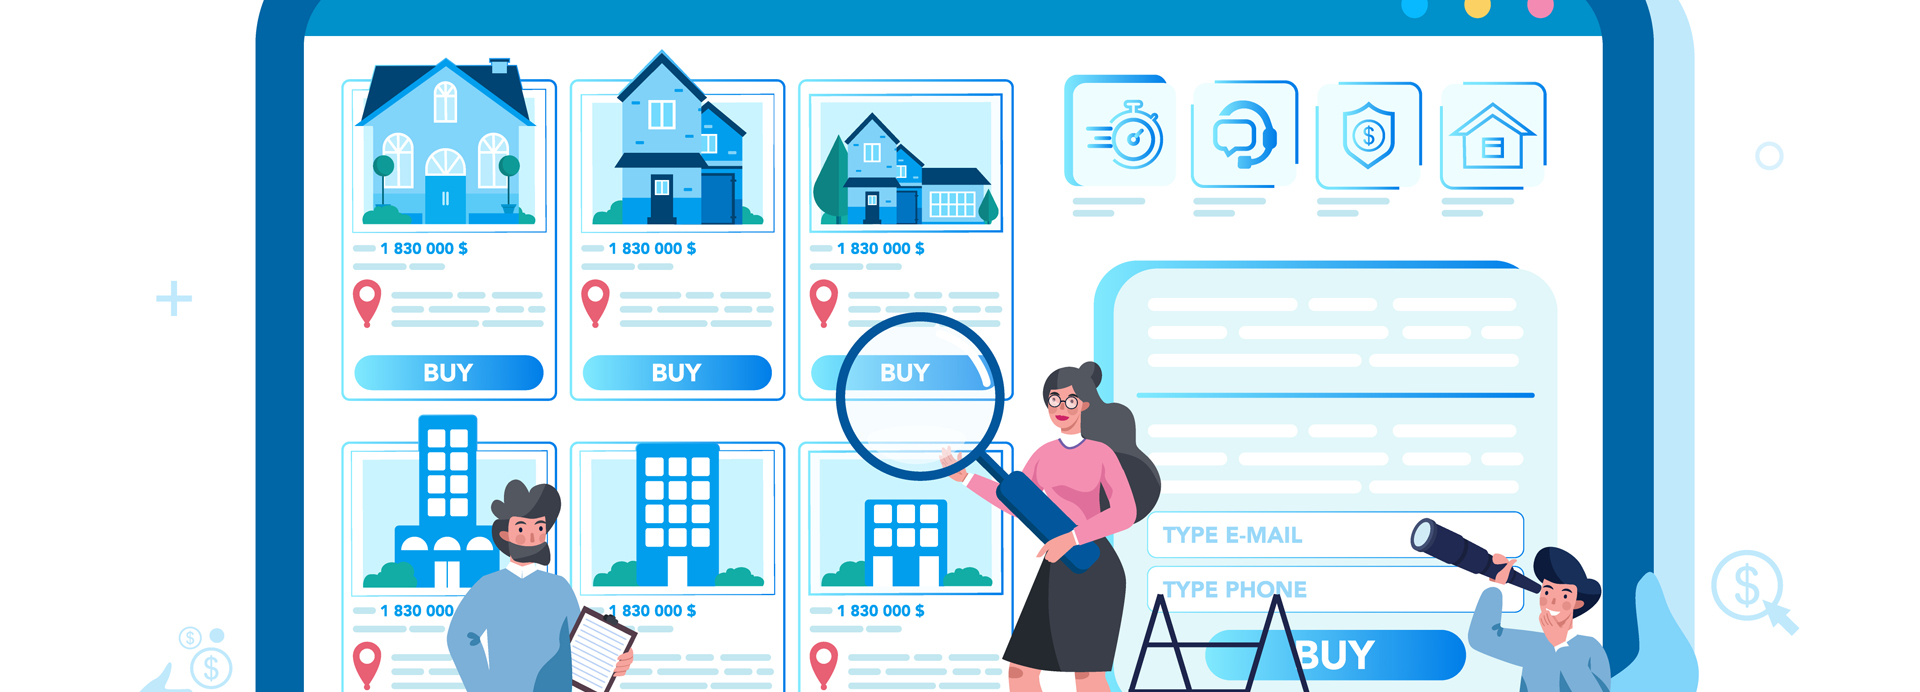 optimize your real estate website seo